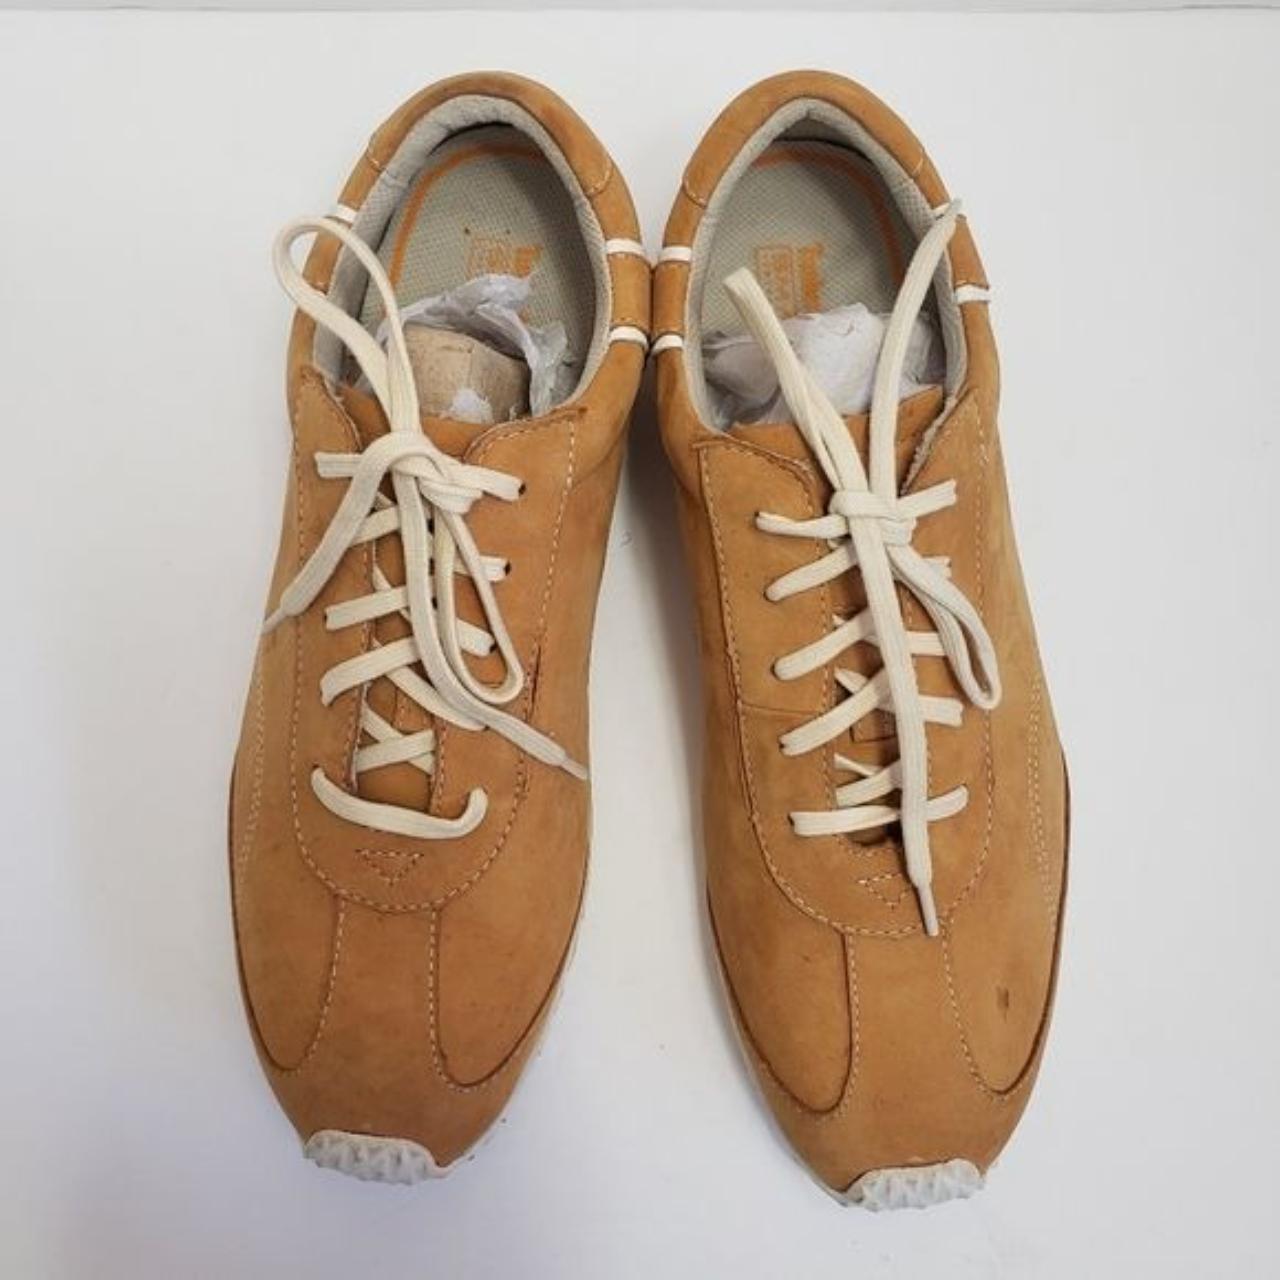 Product Image 3 - TIMBERLAND tan smart comfort sneaker

Lace